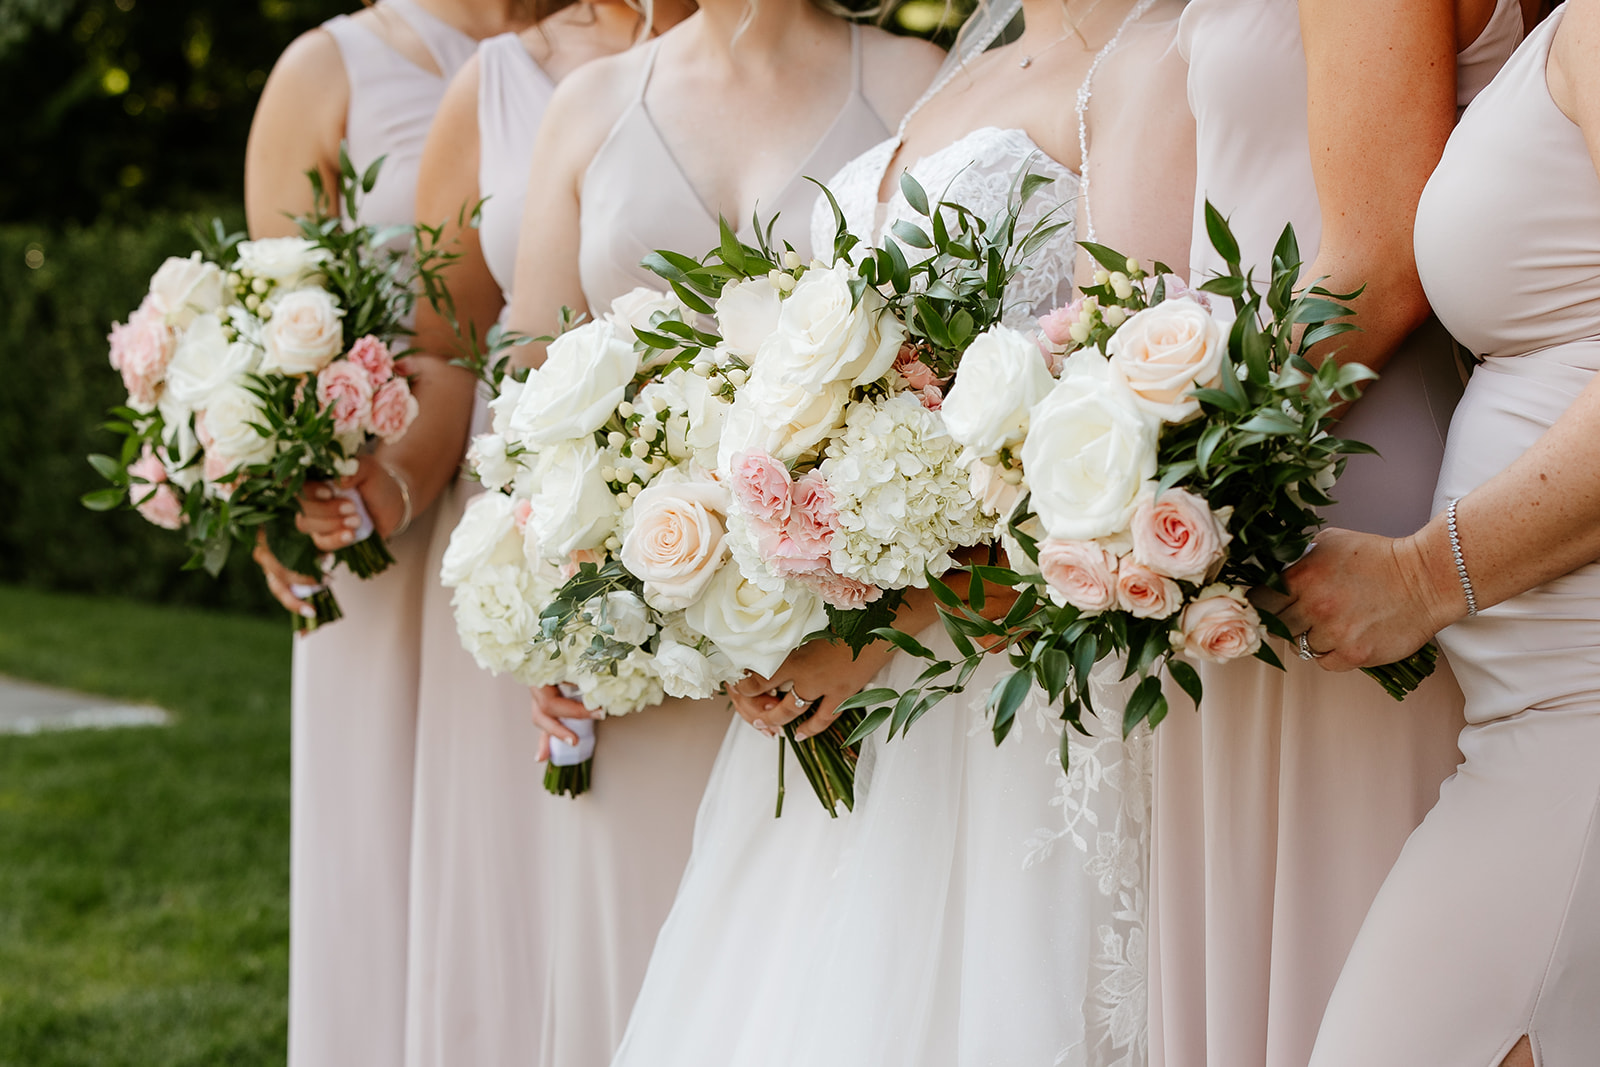 Bridesmaids coordinating dresses pose with a bride, holding bouquets against a backdrop of greenery at Lakeview Pavilion